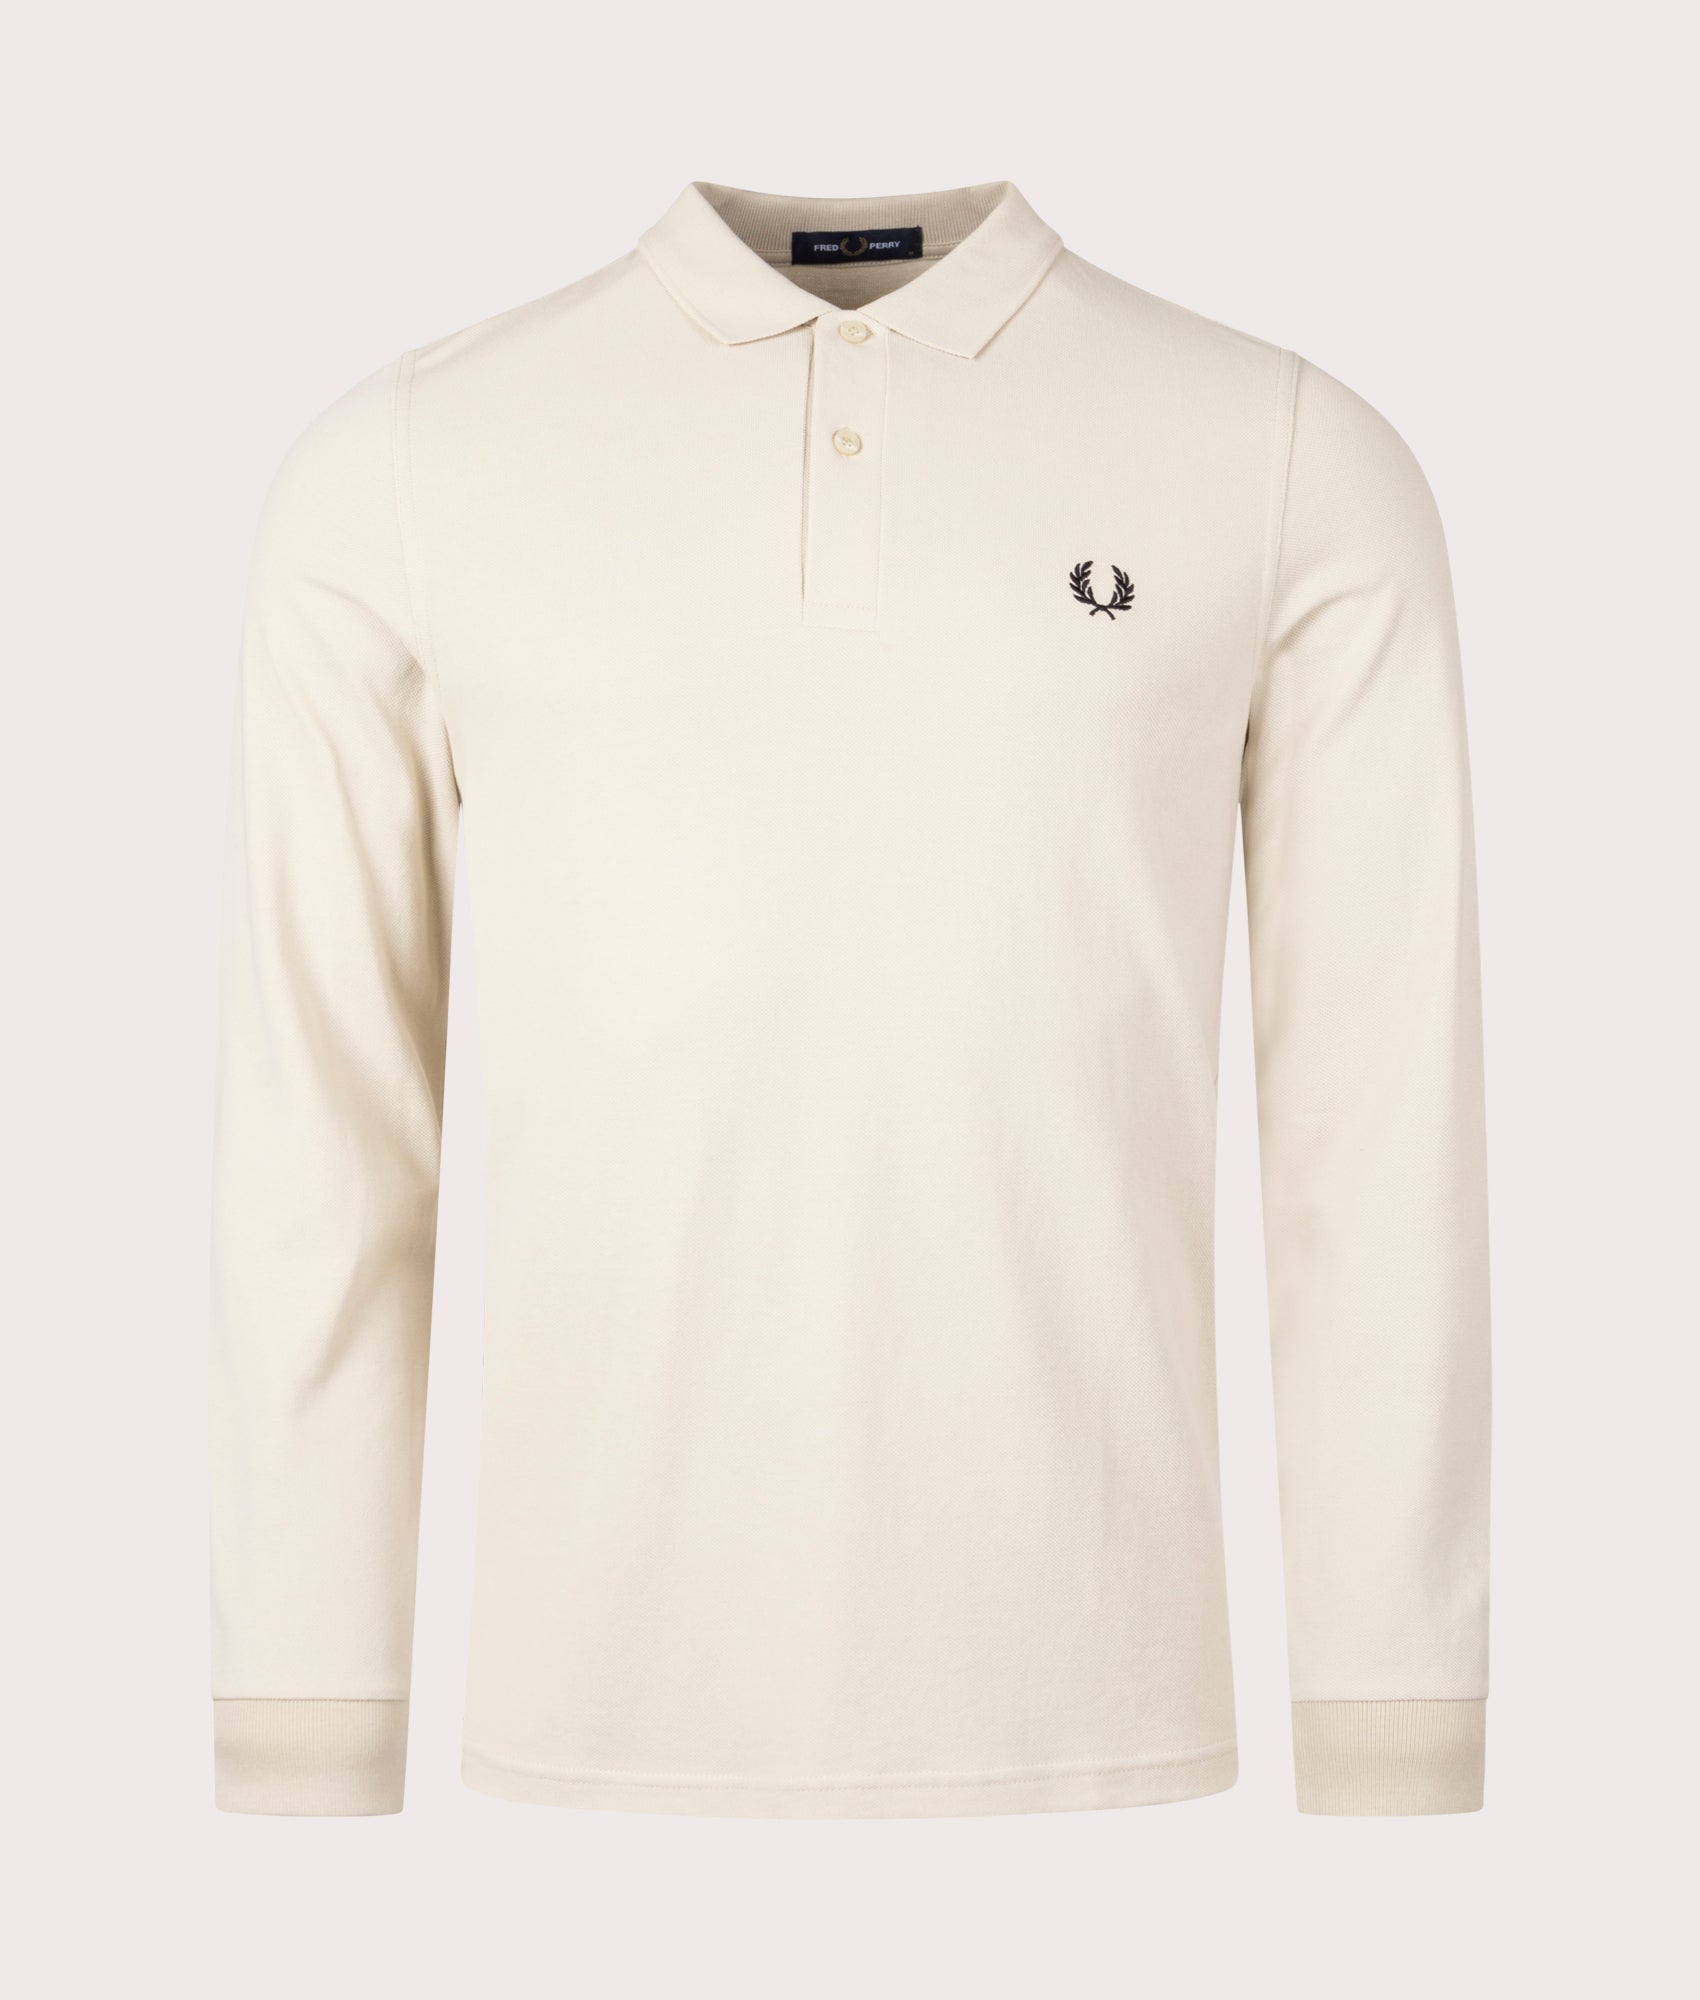 Fred Perry Mens Long Sleeve Tennis Polo Shirt - Colour: T04 Oatmeal/Black - Size: XL